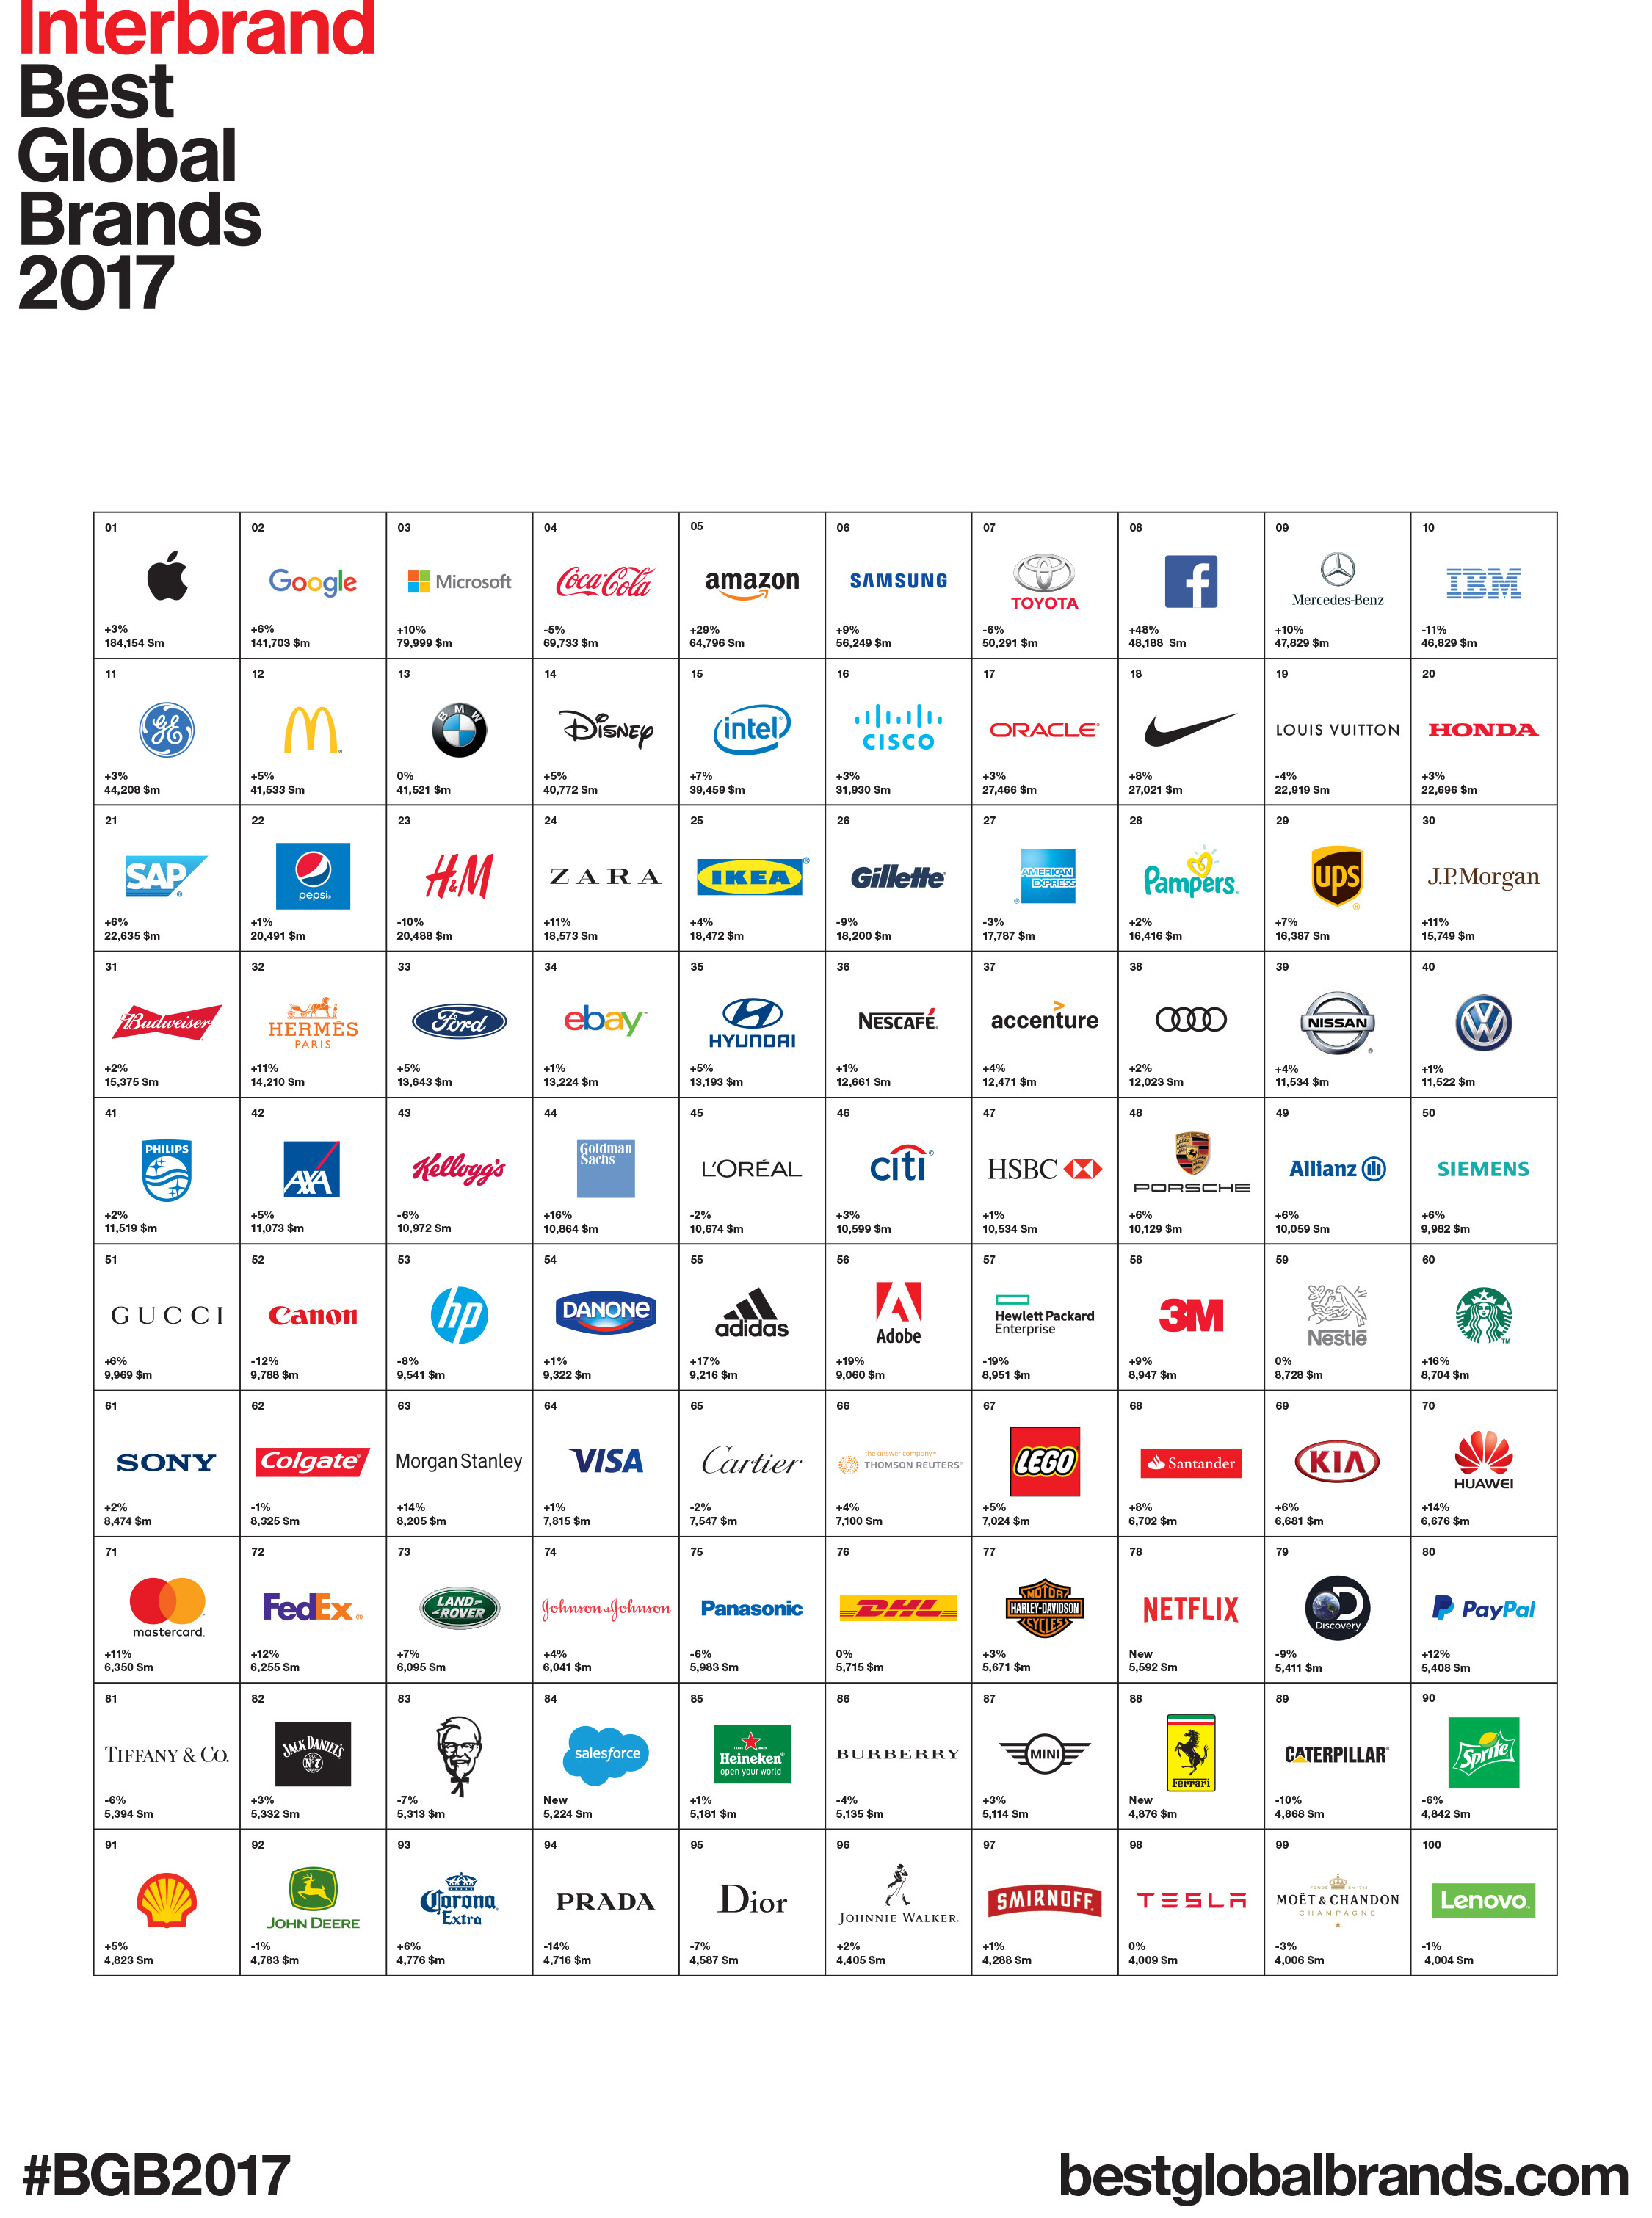 Interbrand Releases 2017 Global Brands Report: Apple and Google Hold the Top Spots, while Ferrari, Netflix and Salesforce.com Enter the List | Business Wire